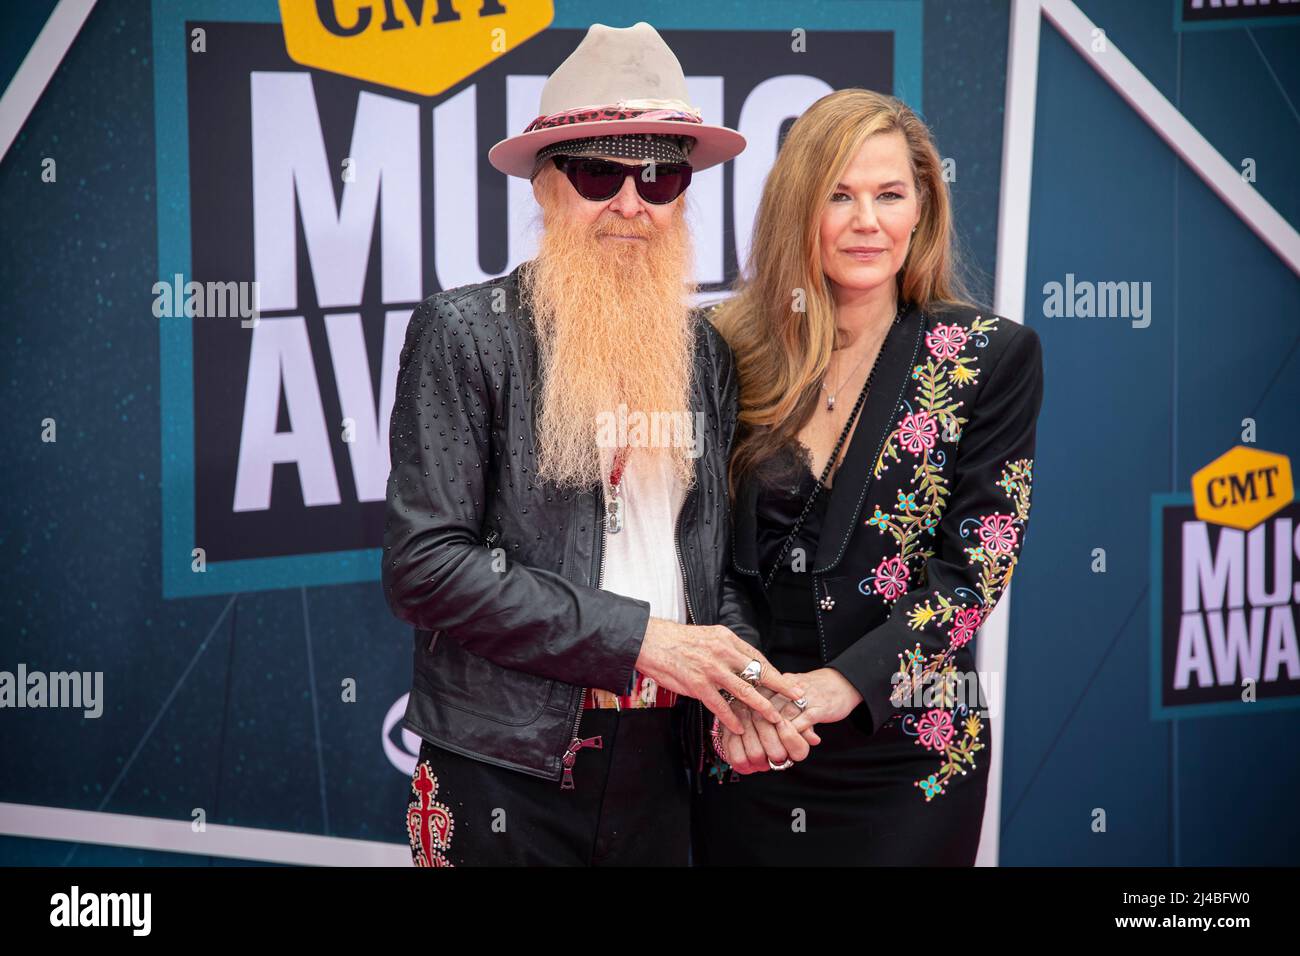 Nashville, Tenn. - April 11, 2022 Billy Gibbons of ZZ Top and wife Gilligan Stillwater arrives at the red carpet for the 2022 CMT Awards on April 11, 2022 at Municipal Auditorium in Nashville, Tenn. Credit: Jamie Gilliam/The Photo Access Stock Photo